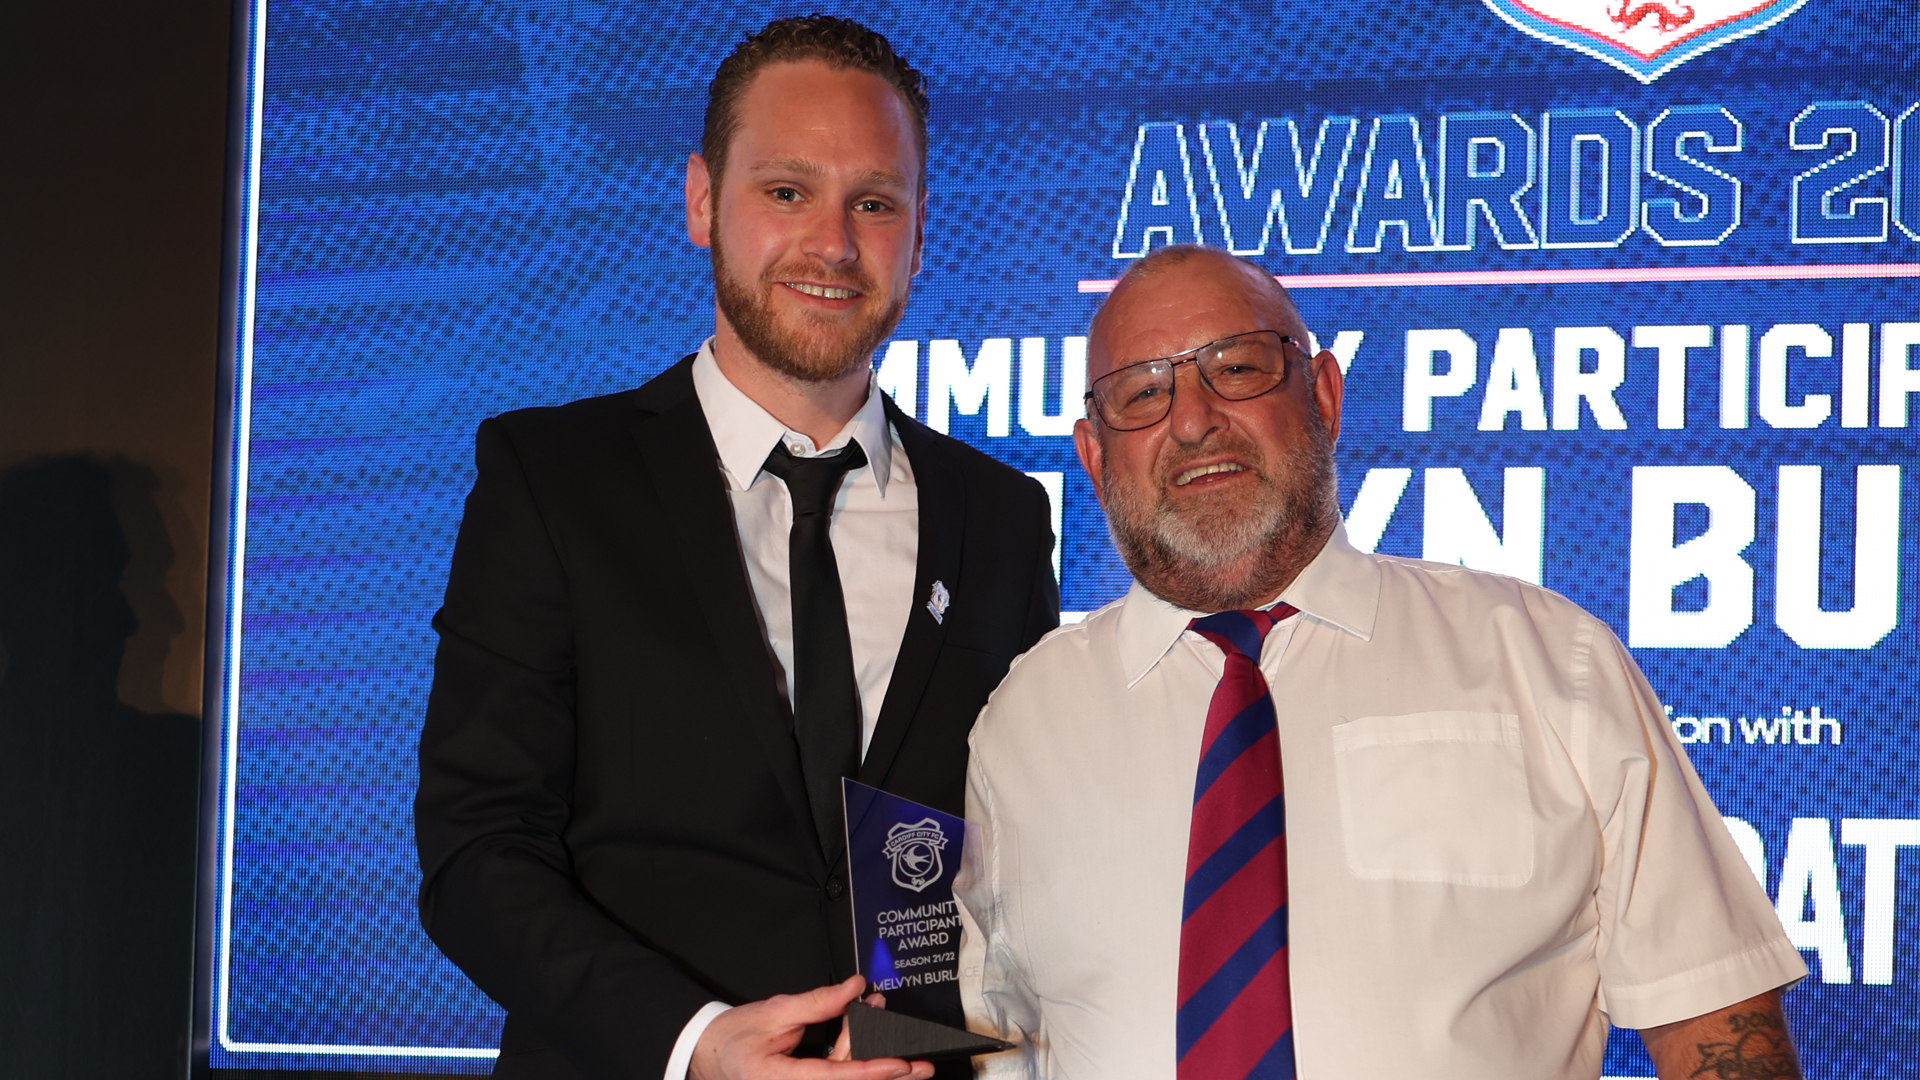 Cardiff City FC Foundation's Community Participant of the Year Award - Melvyn Burlace